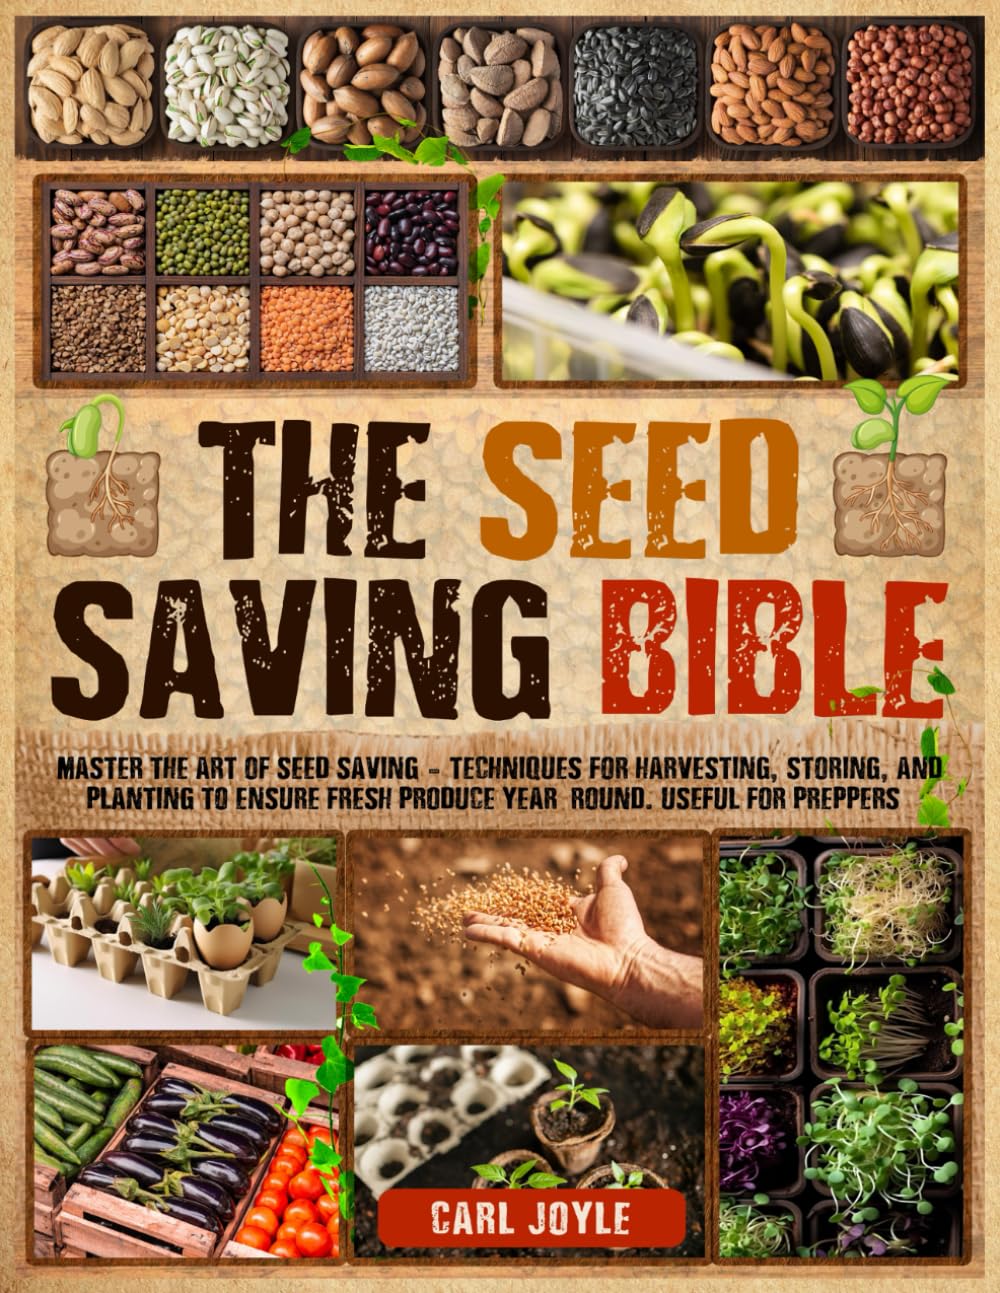 The Seed Saving Bible: Master the Art of Seed Saving. Techniques for Harvesting, Storing, and Planting to Ensure Fresh Produce Year-Round. Also useful for preppers.